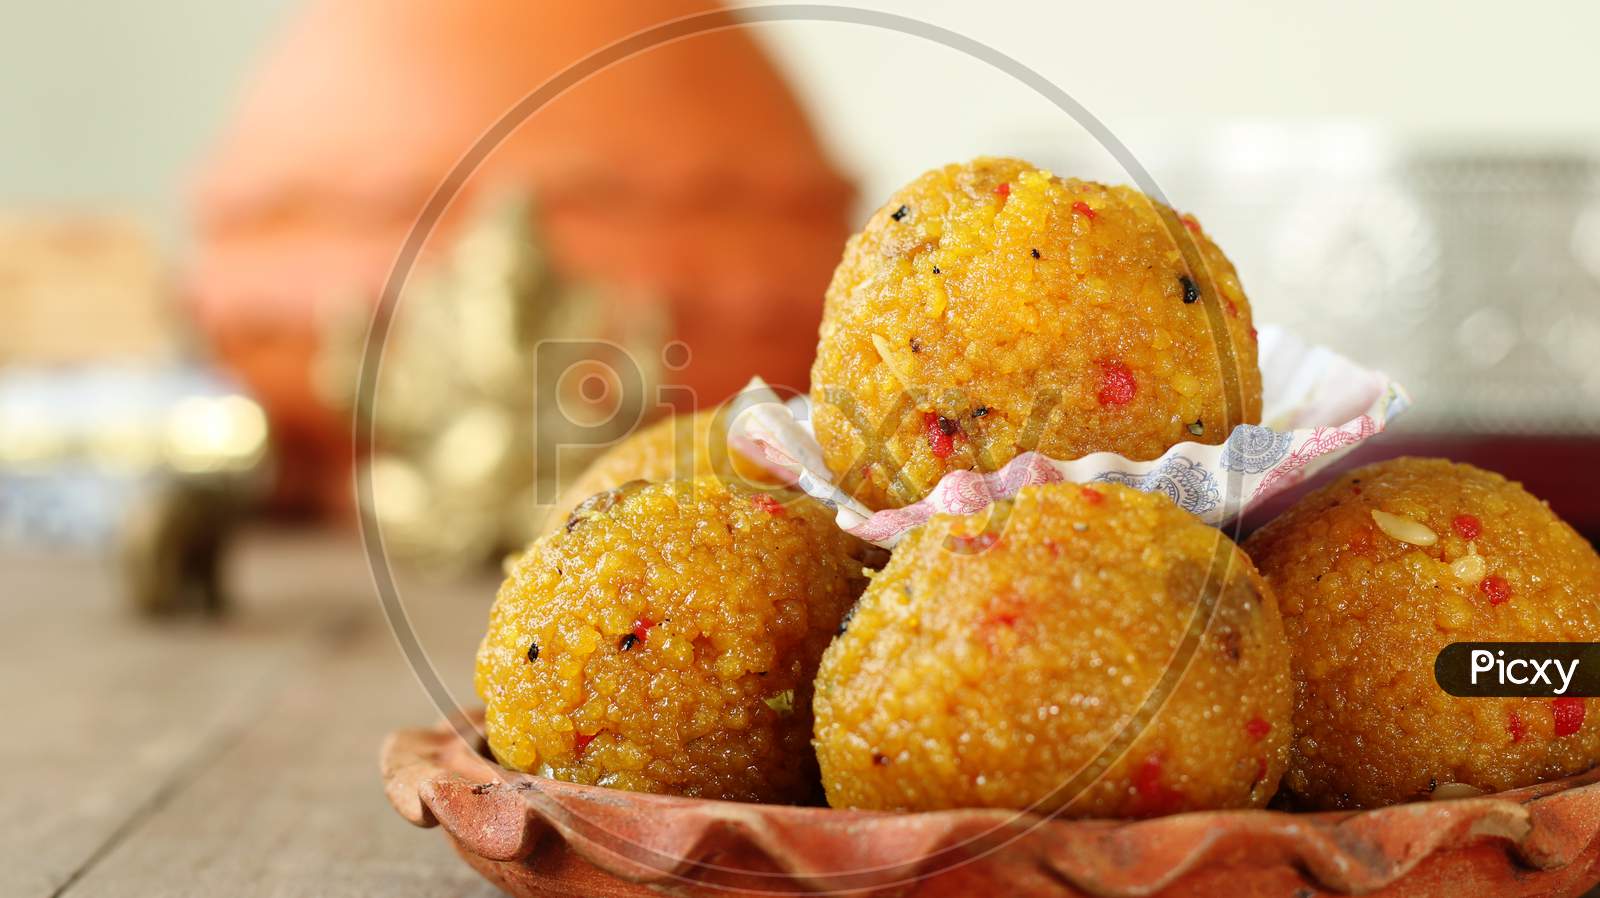 Delicious Indian sweets, Laddu or motichur, on the occasion of Ganesh Chaturthi